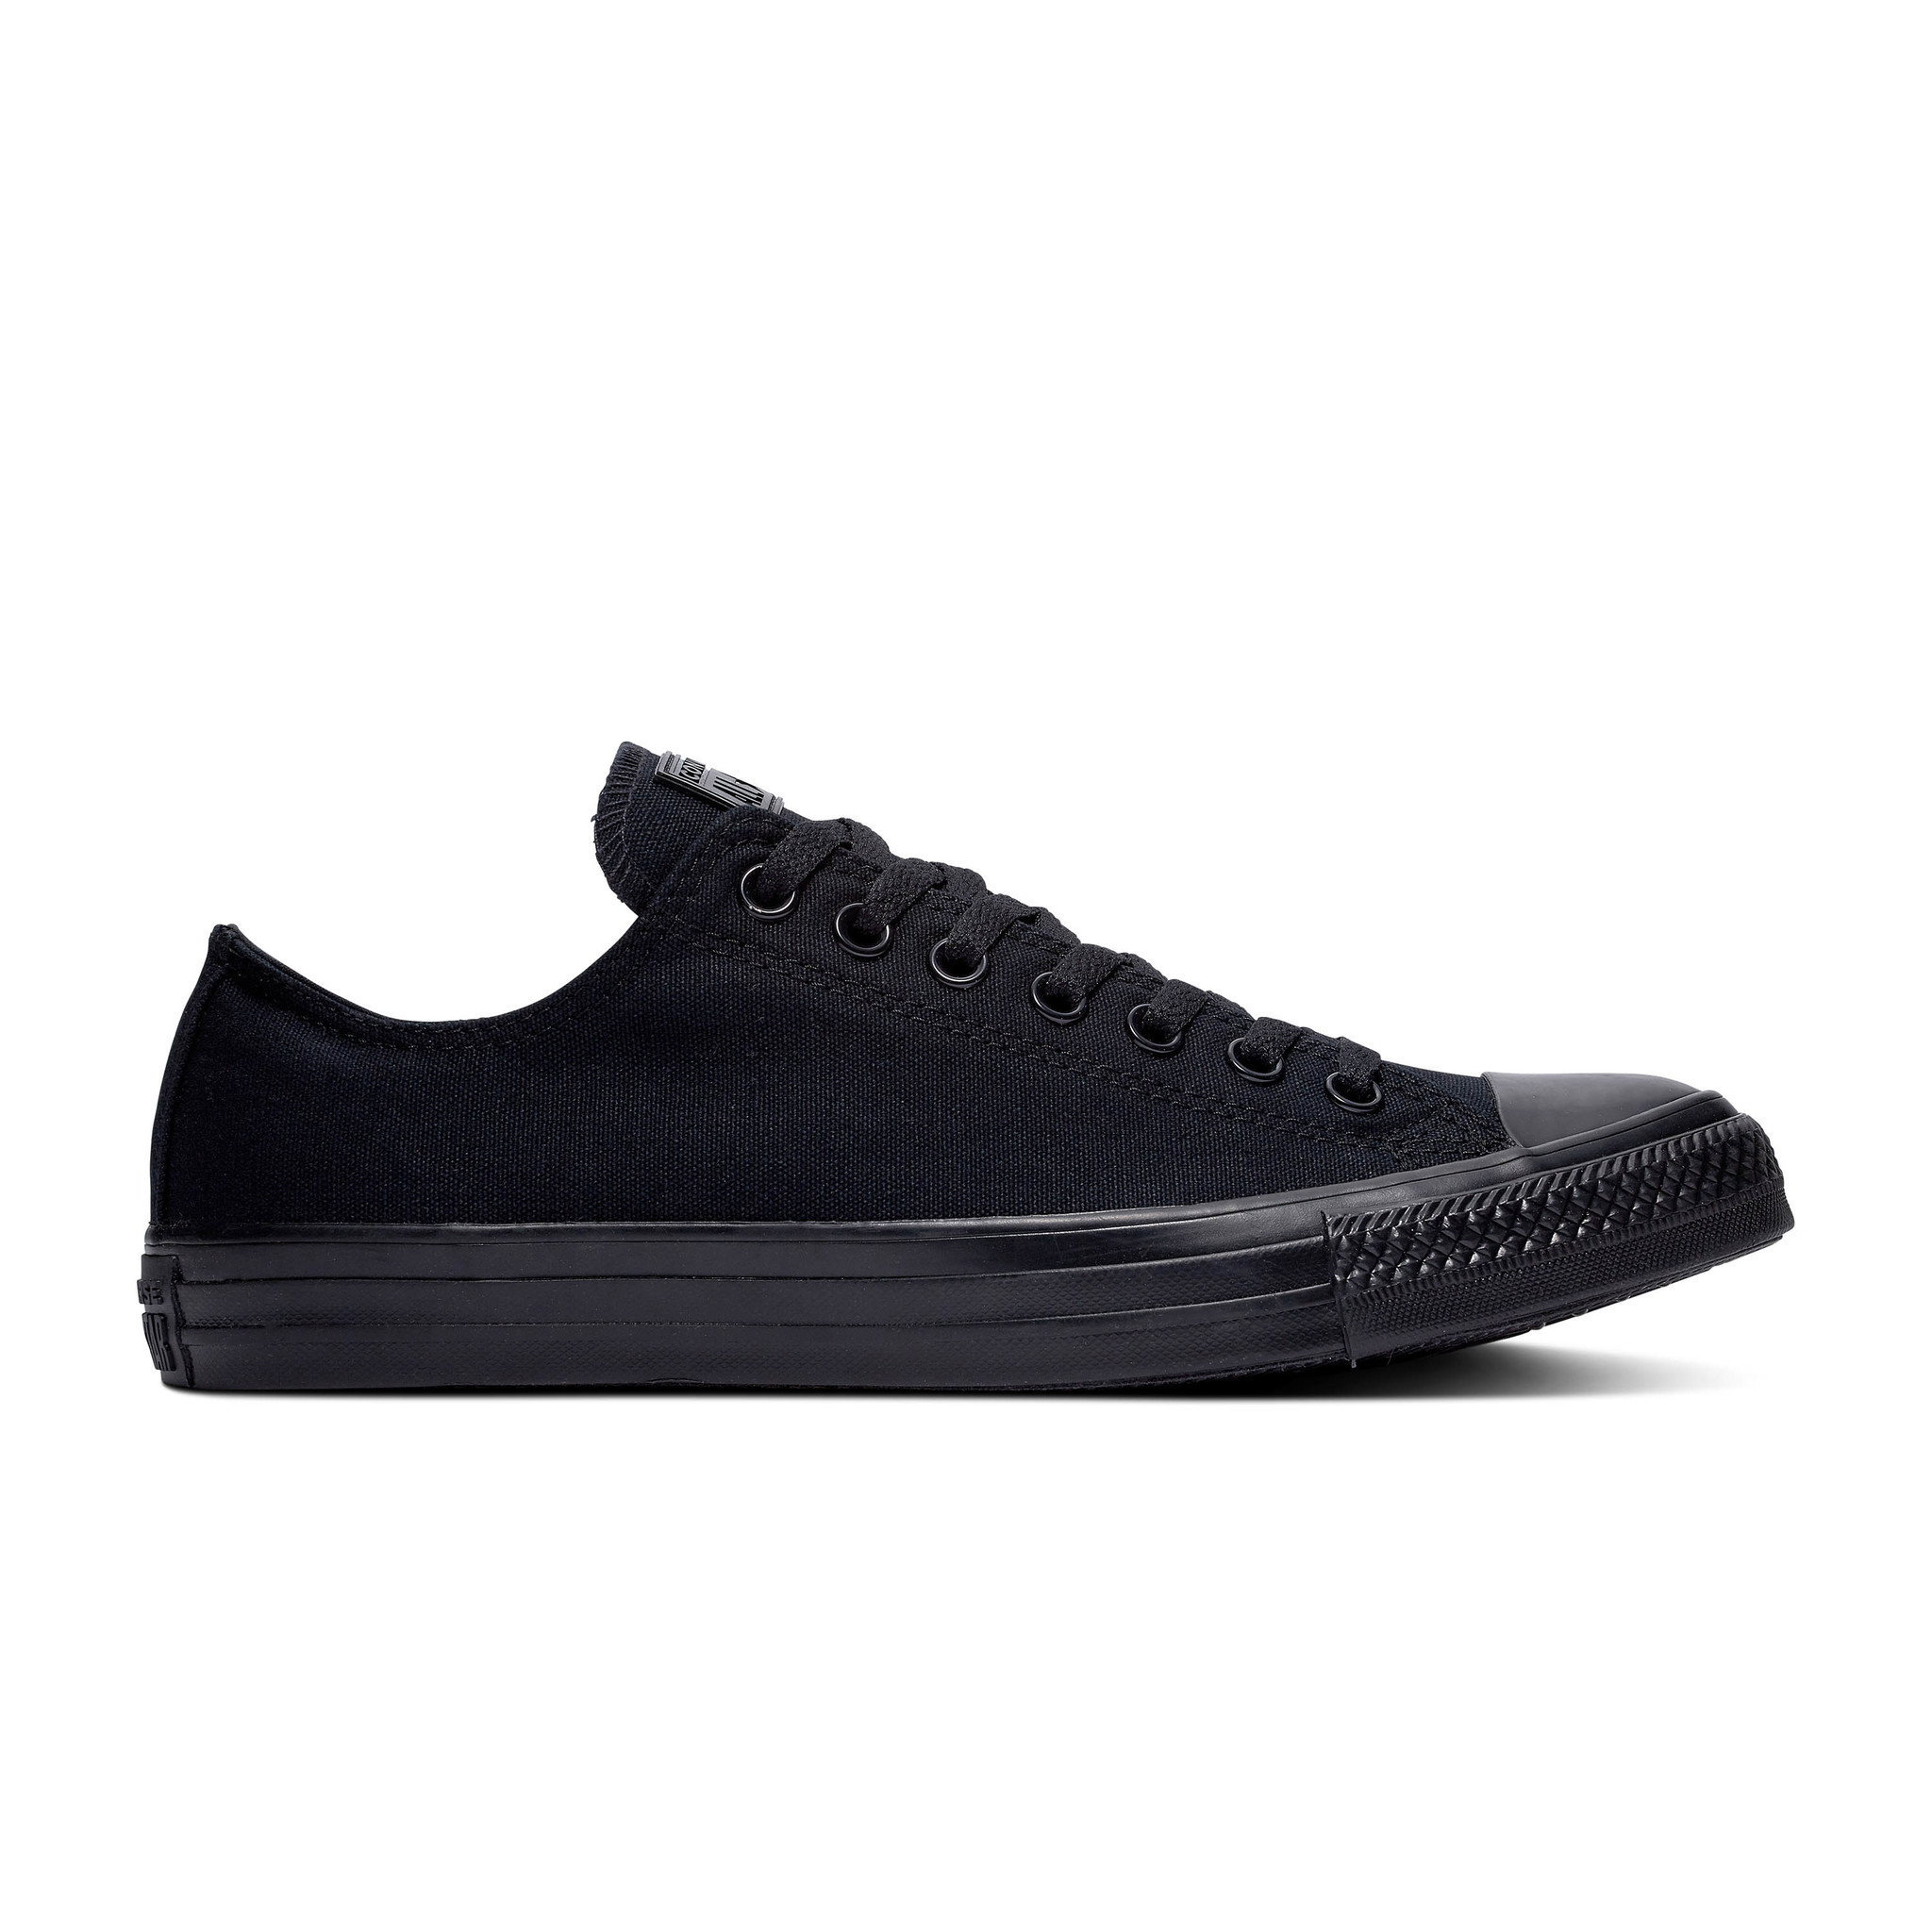 Chuck Taylor All Star Low- Black Monochrome - Sports Gallery